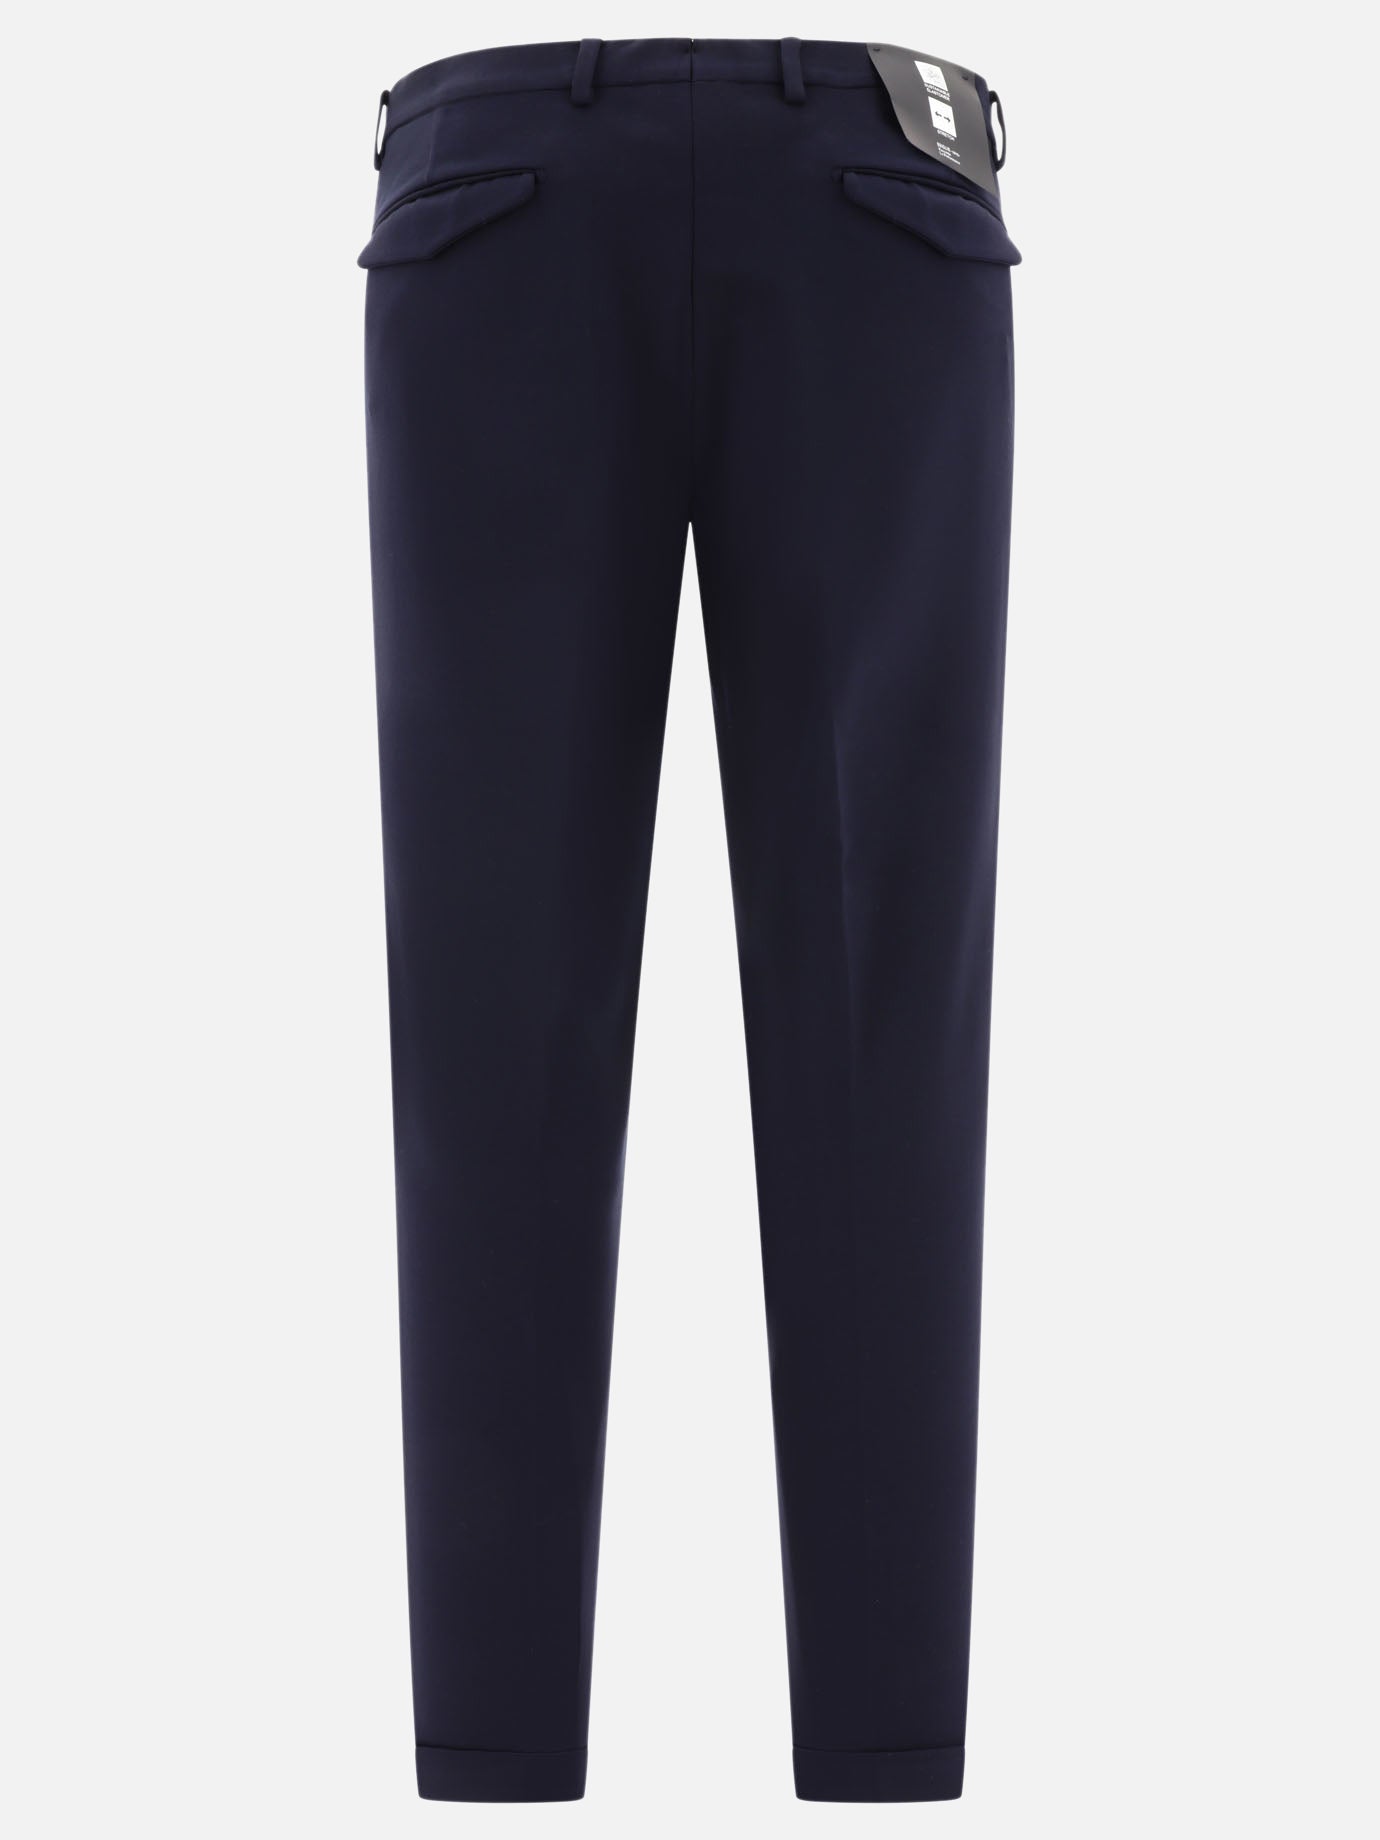 Performance trousers